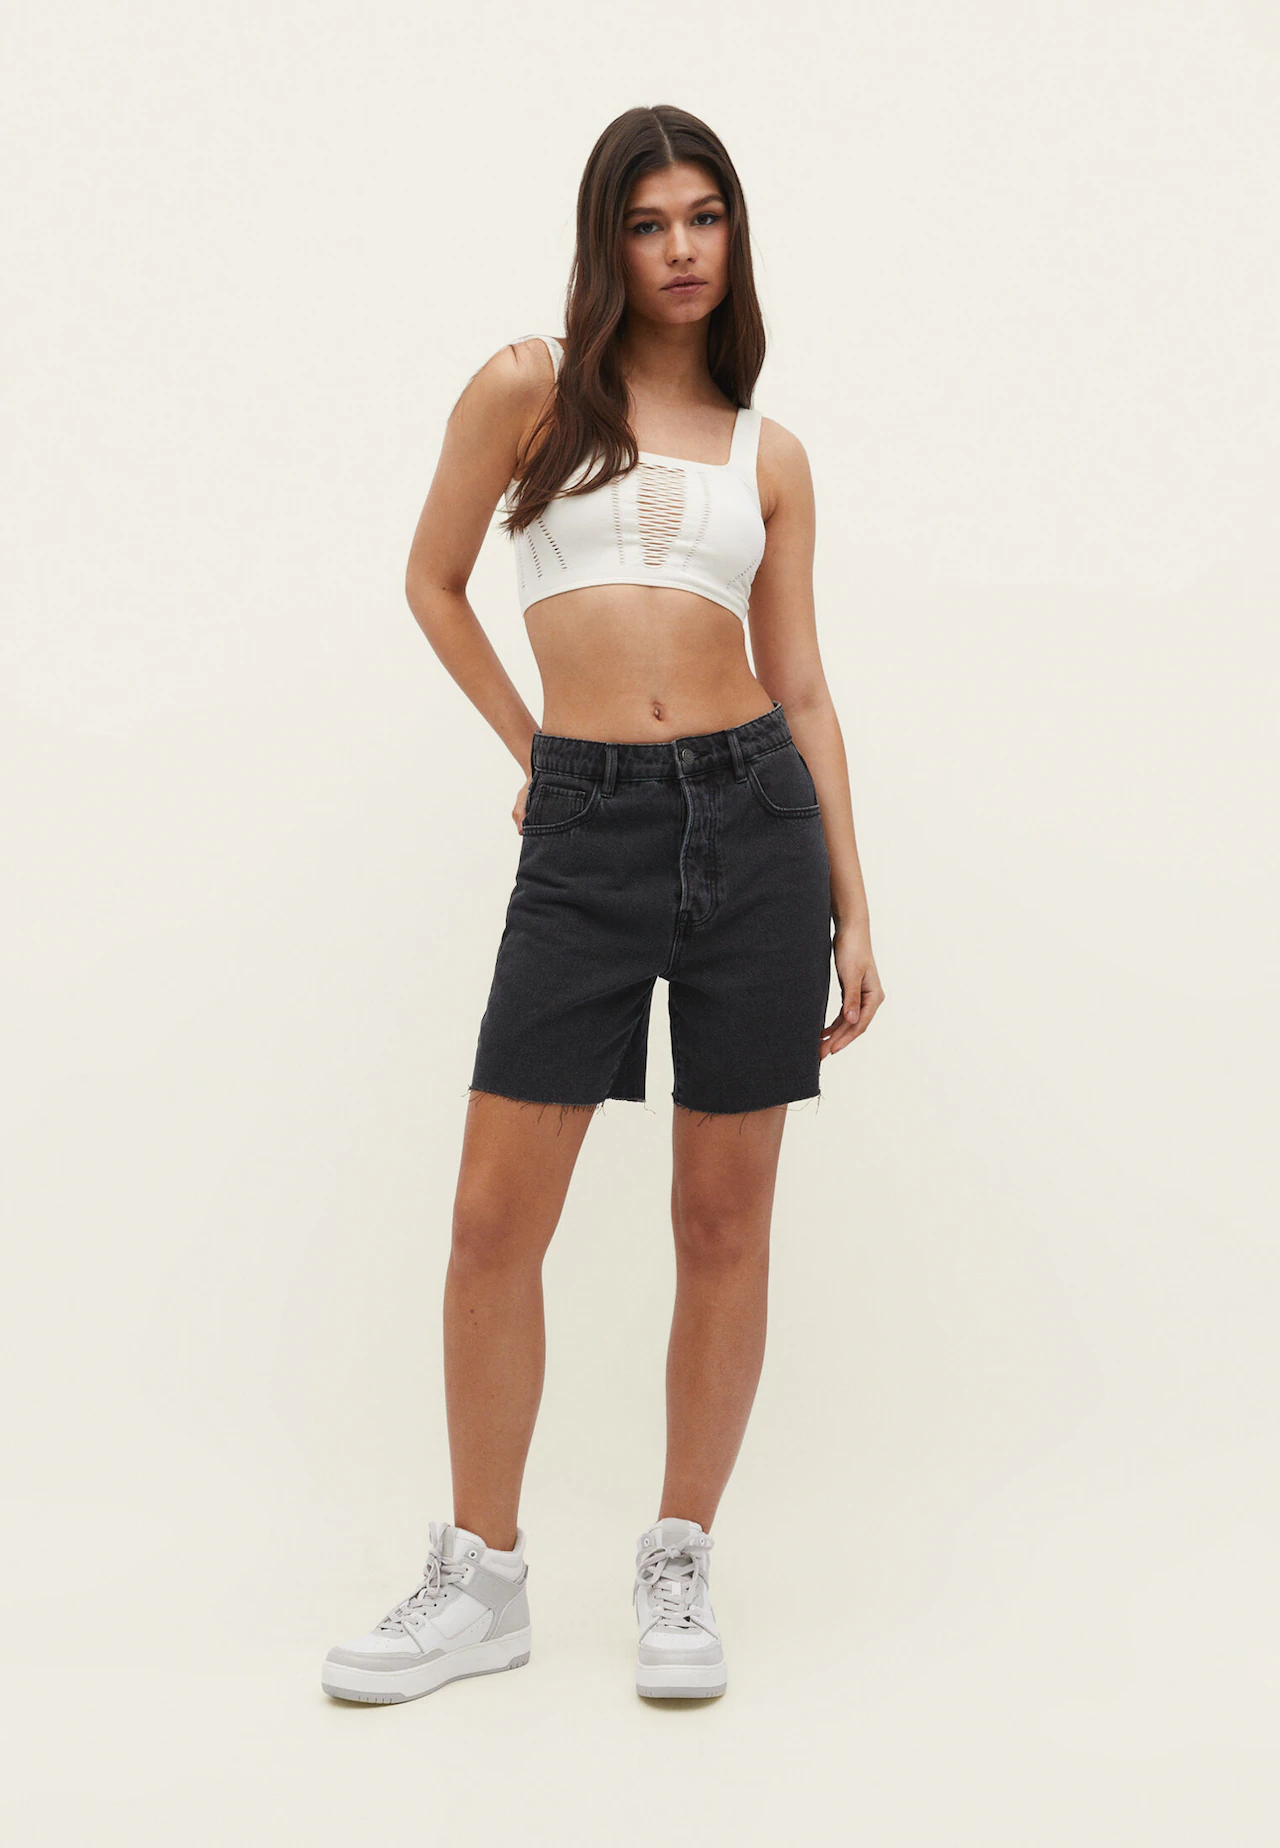 Perforated bralette - Women's fashion